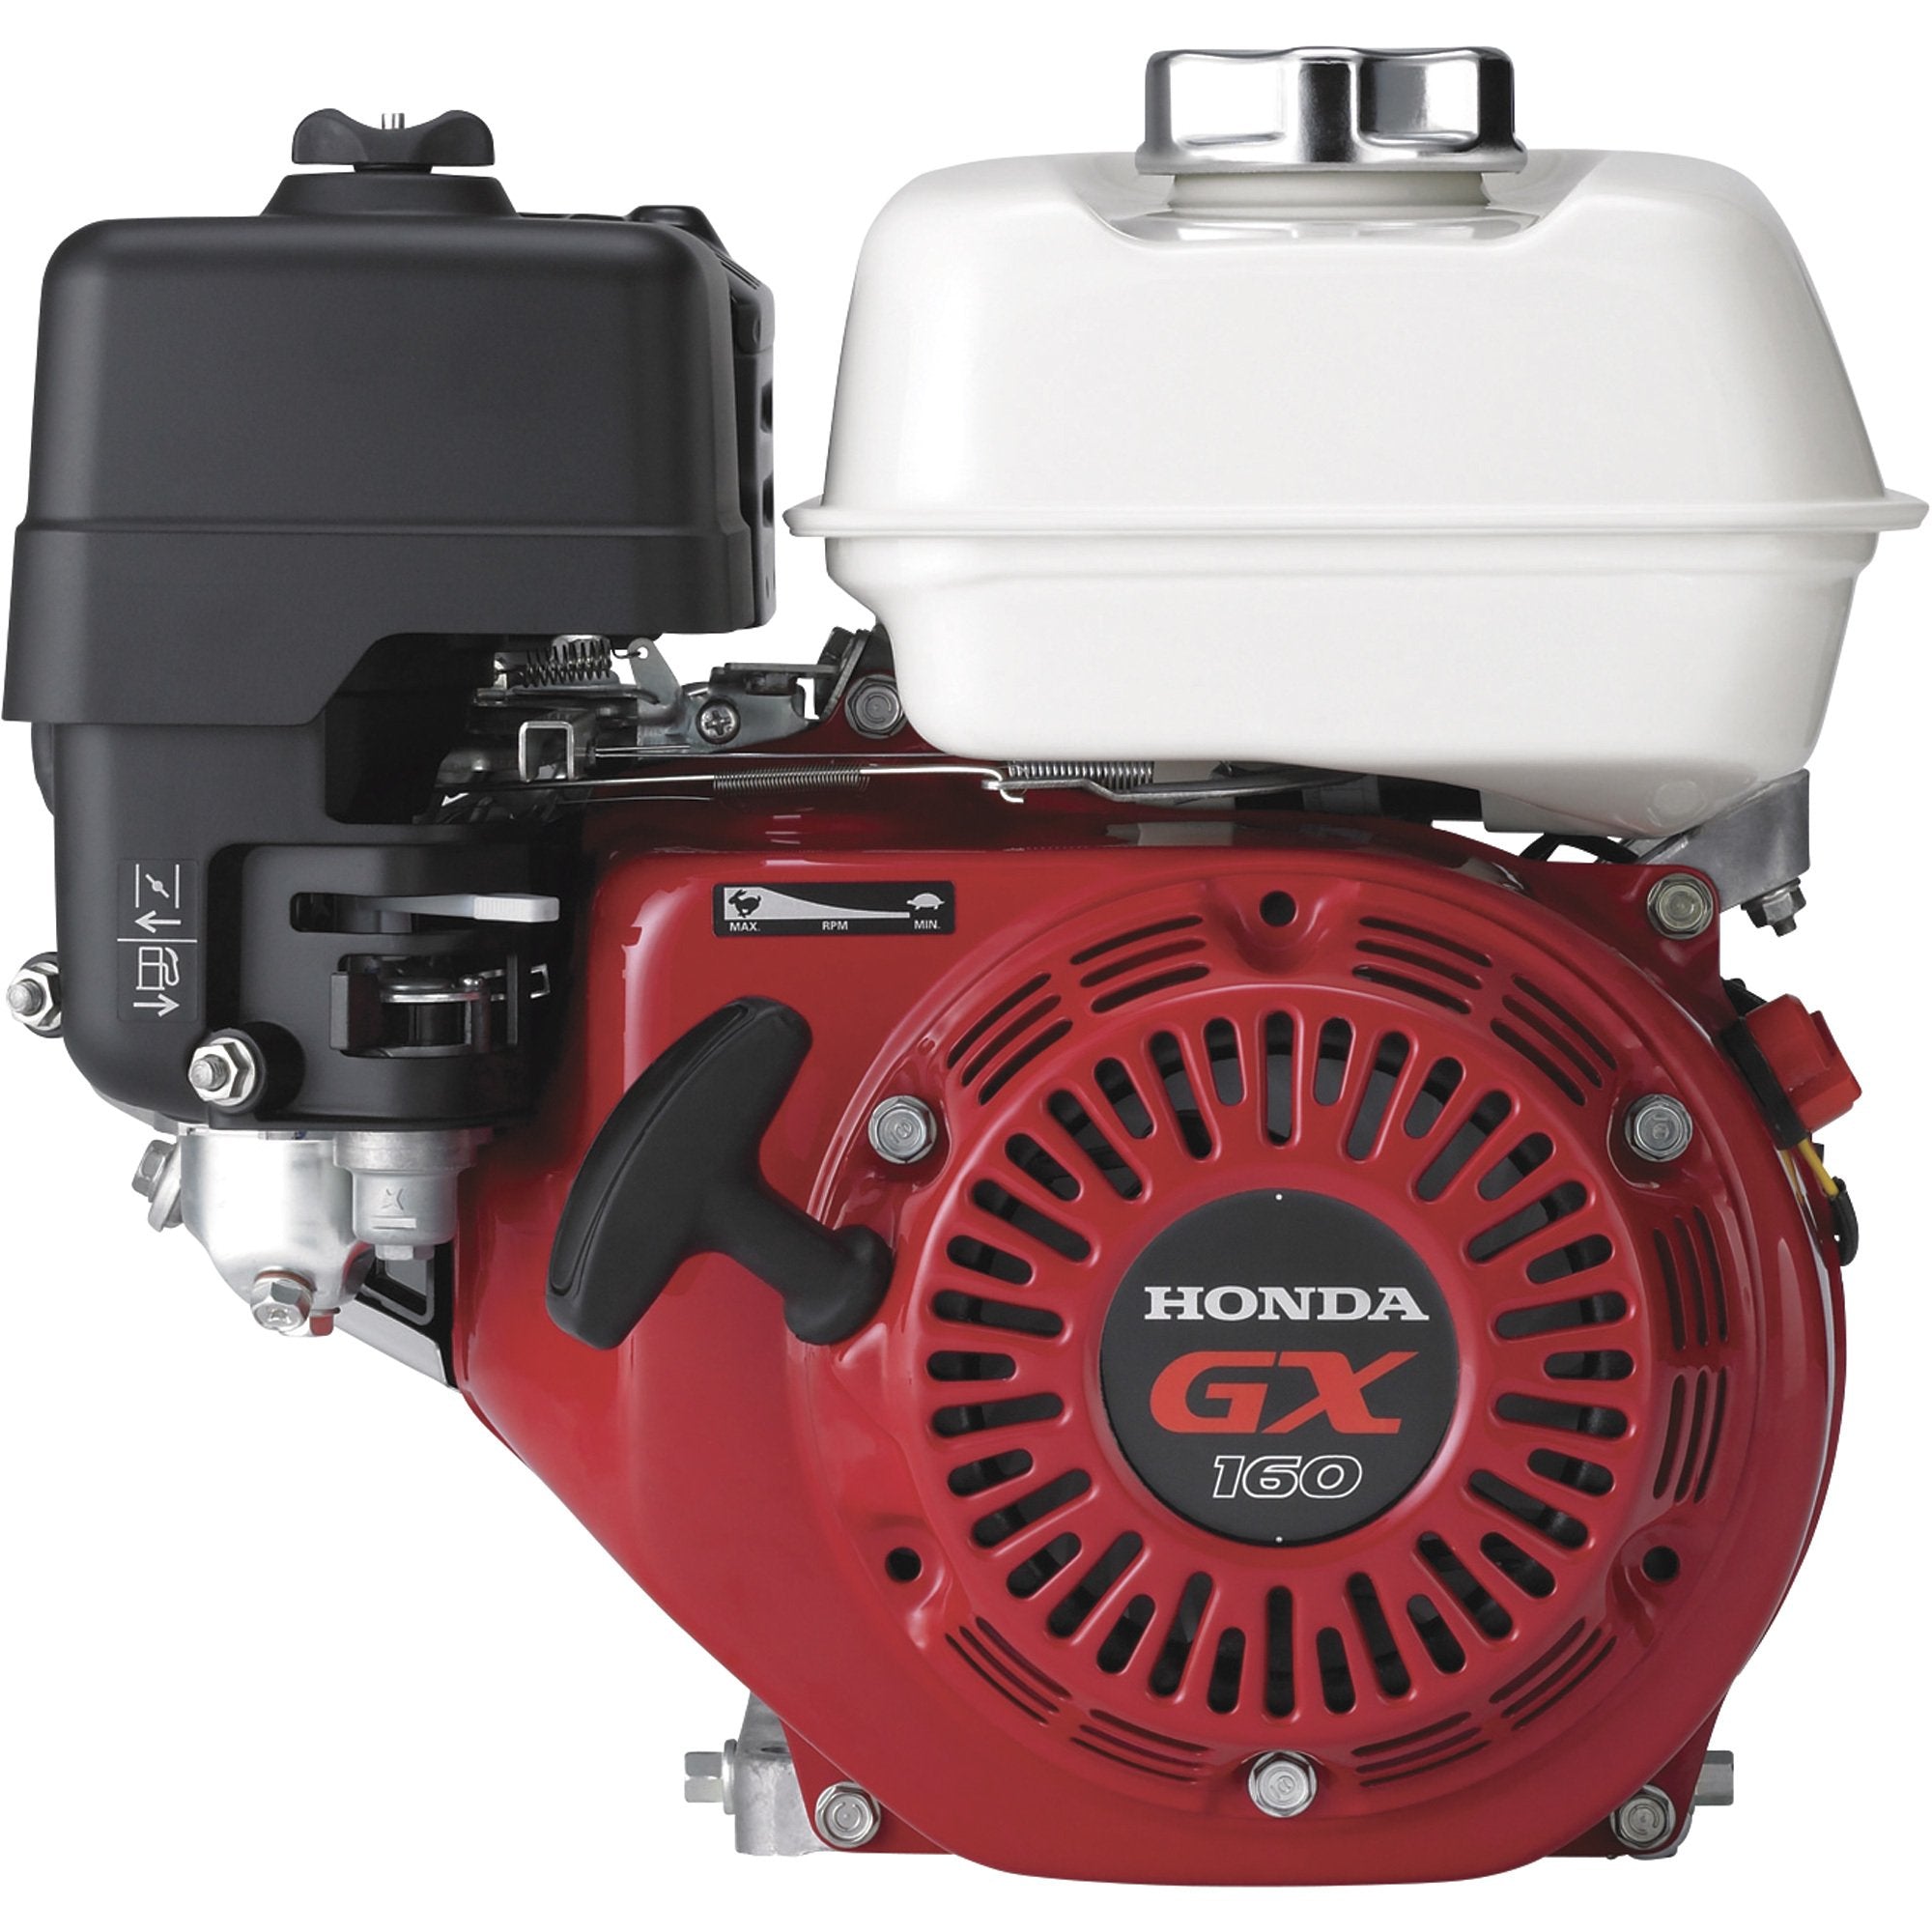 Honda GX160 Replacement Engine - Contractor's Maintenance Service